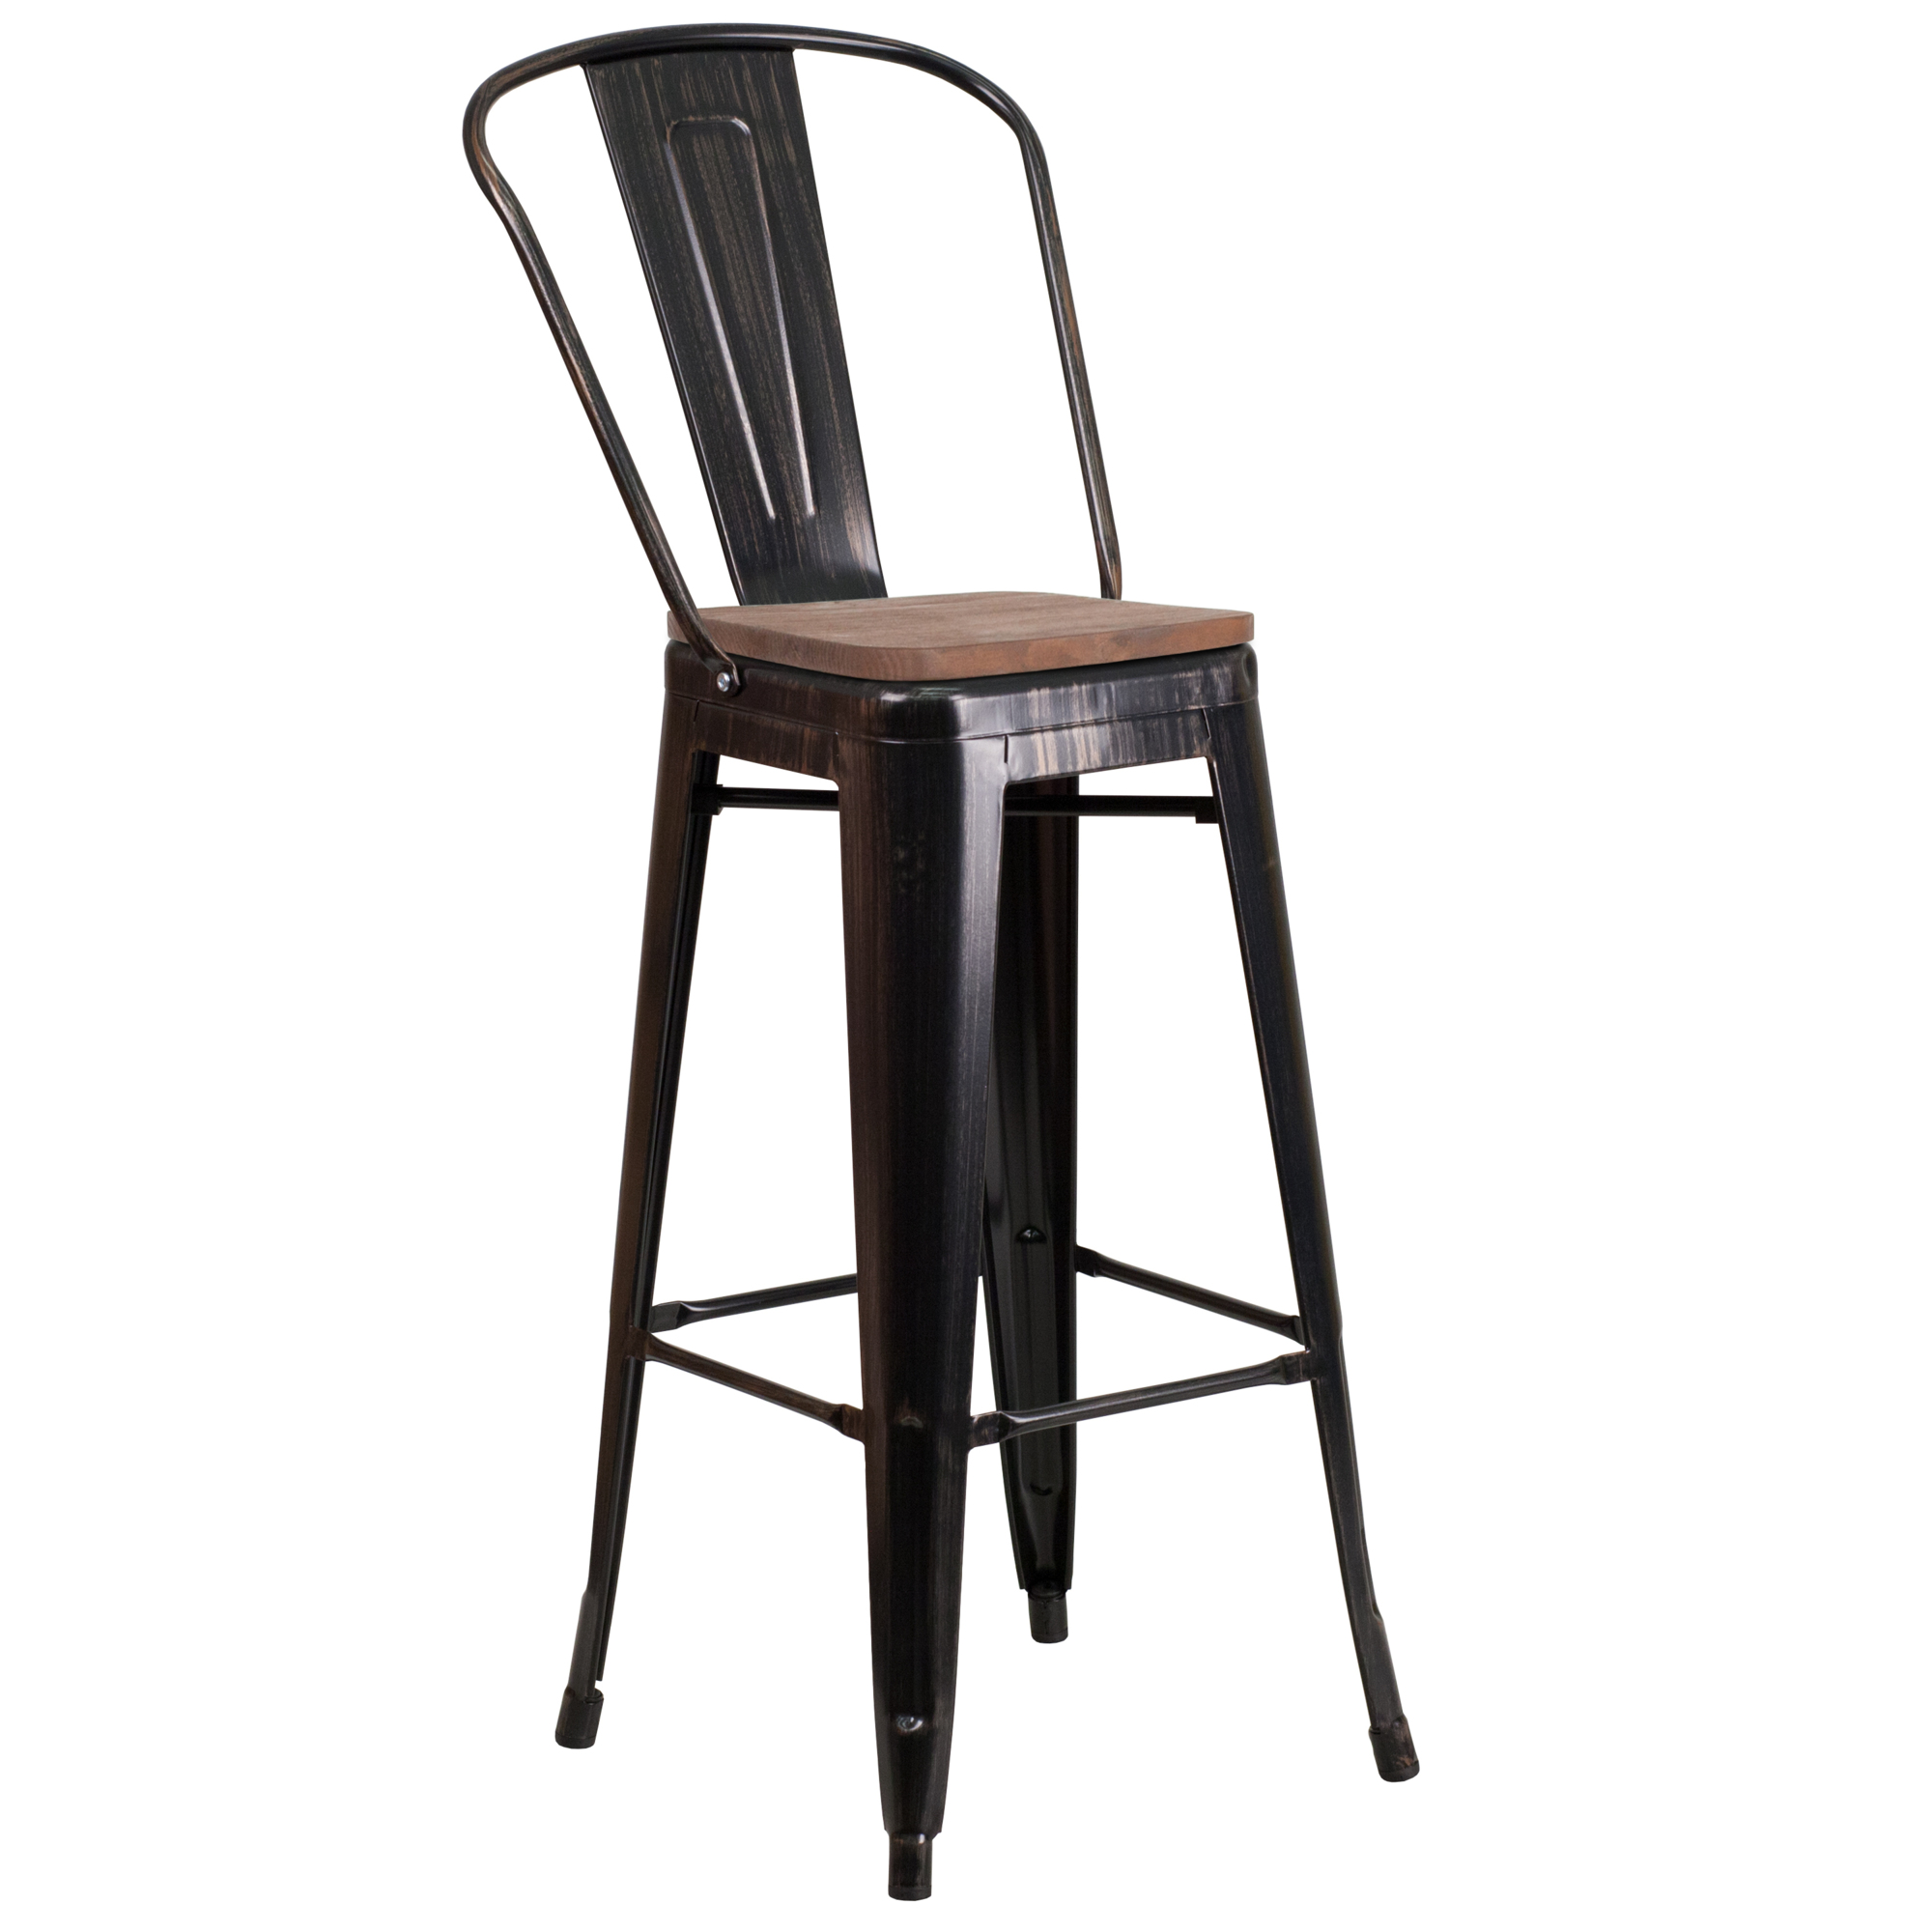 Flash Furniture, 30Inch High Black-Antique Gold Metal Barstool w/Back, Primary Color Gold, Included (qty.) 1, Model CH3132030GBBQW